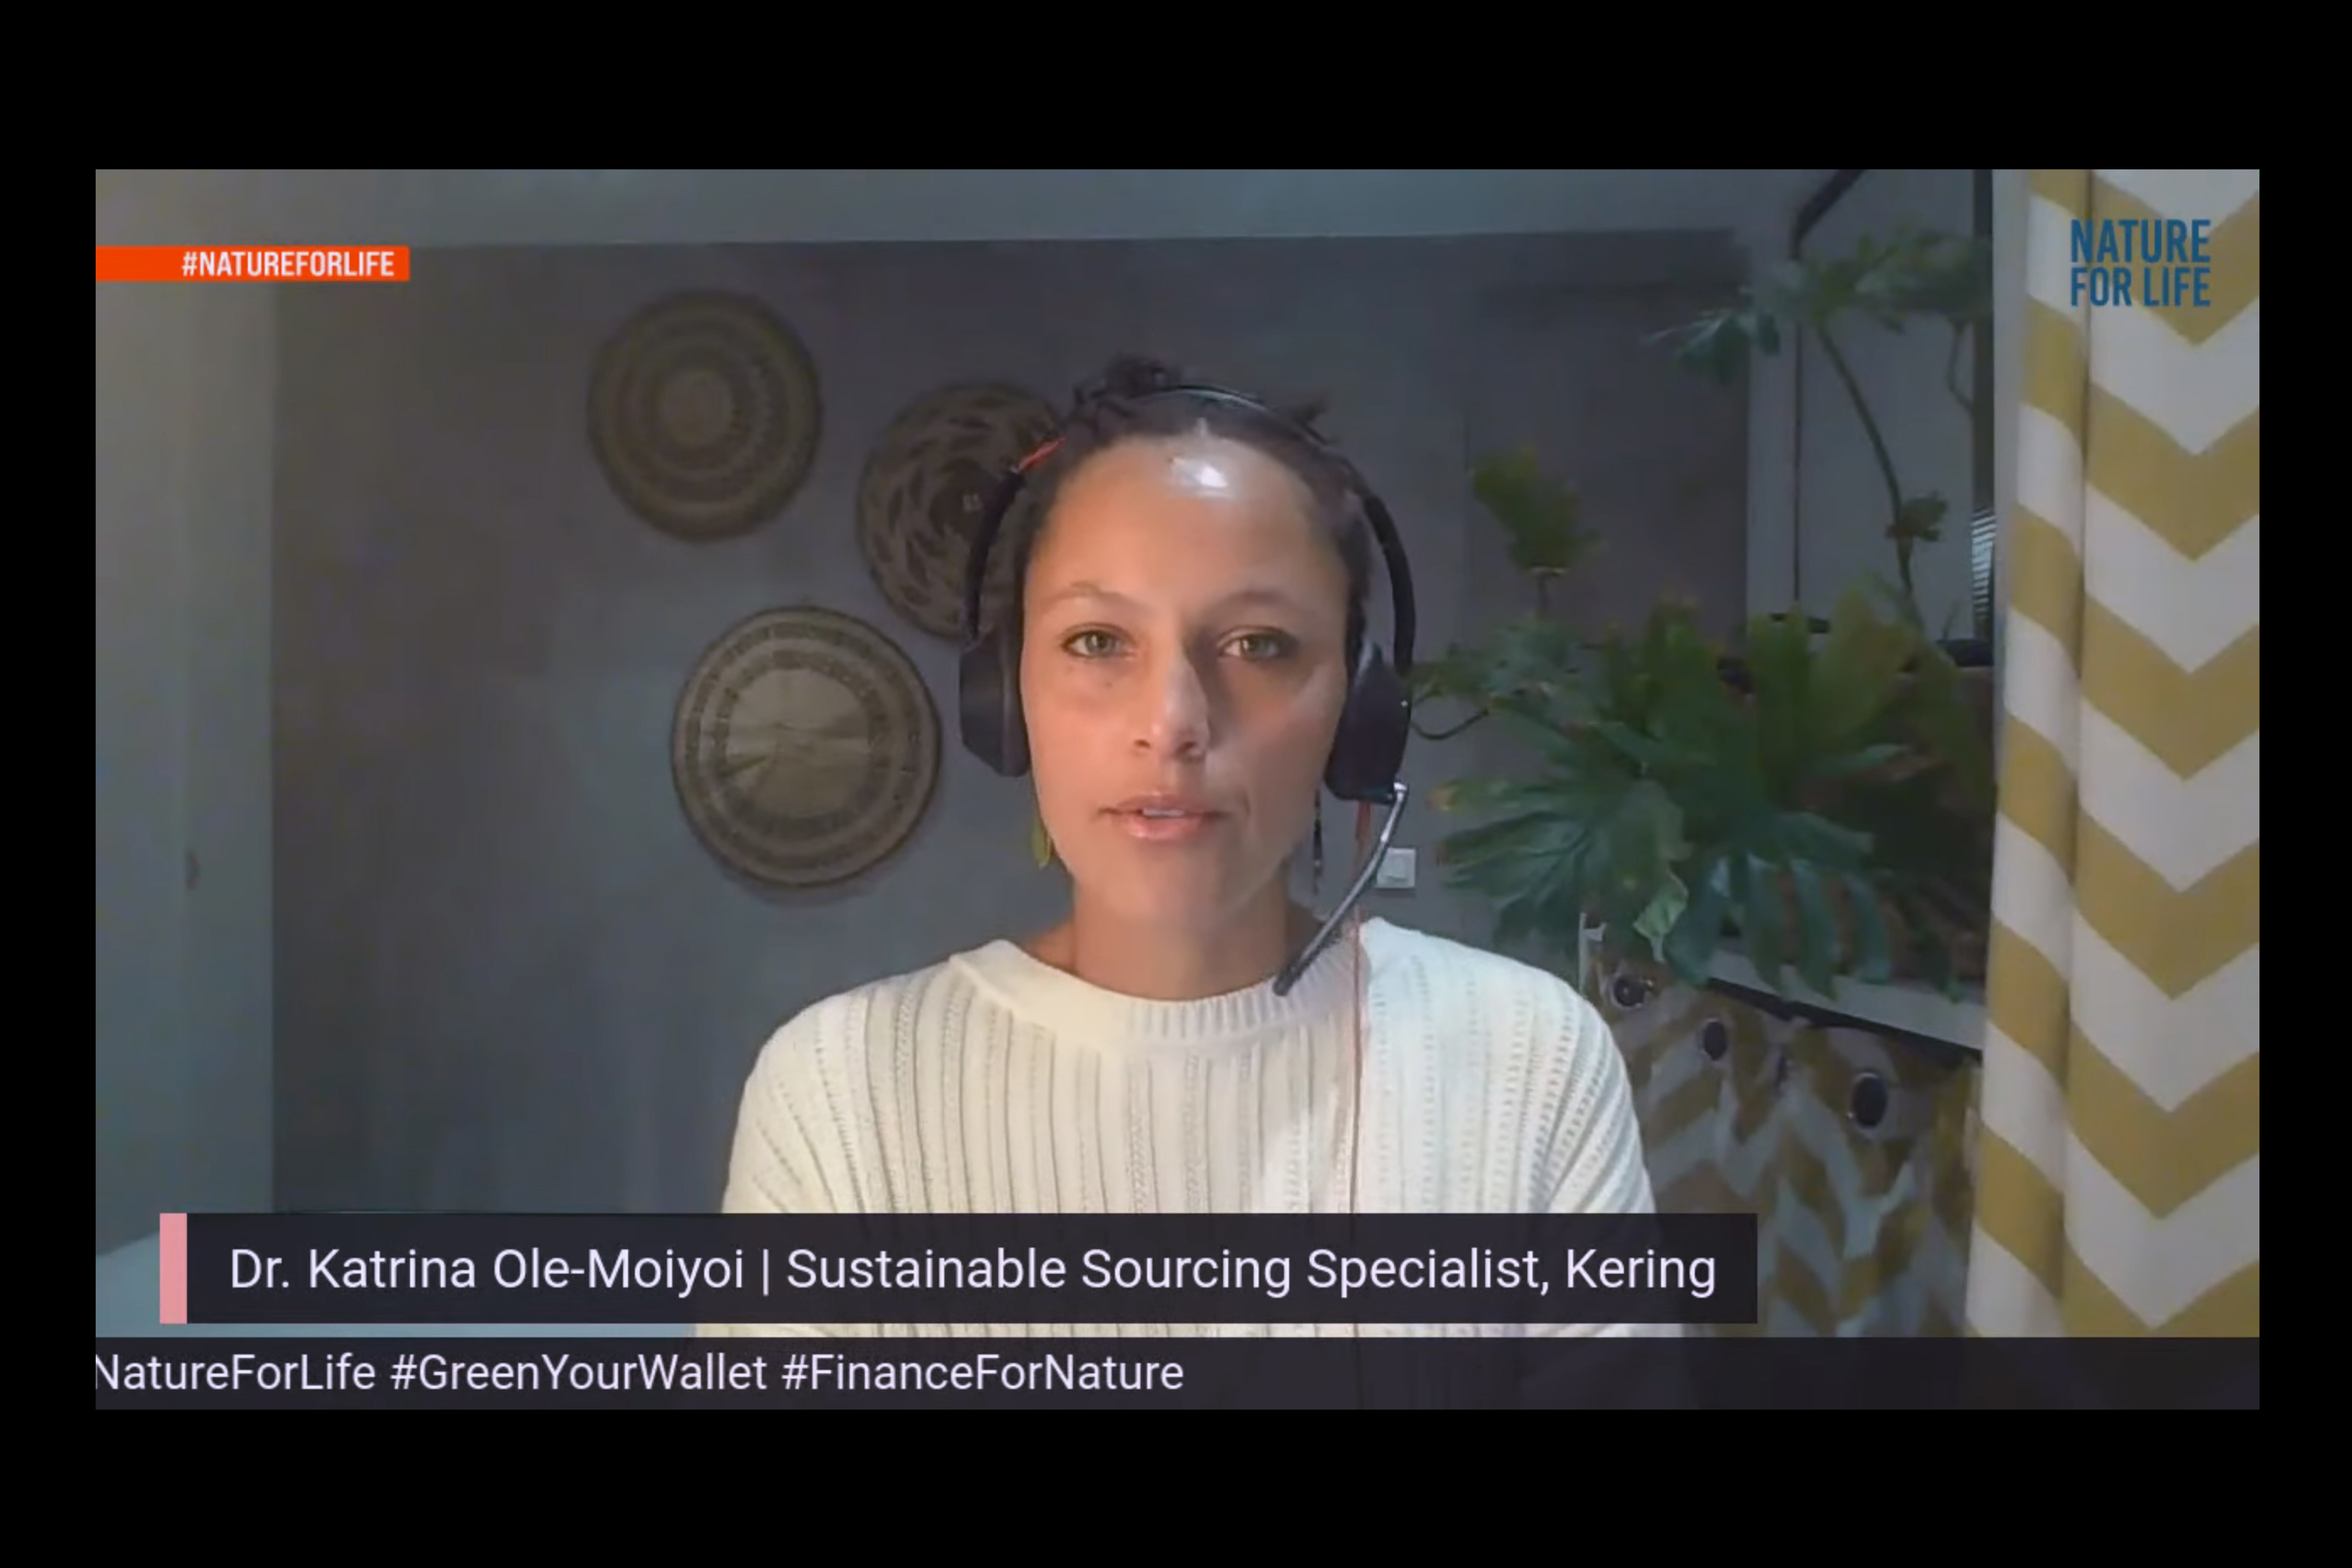 Katrina Ole-Moiyoi, Sustainable Sourcing Specialist for Kering